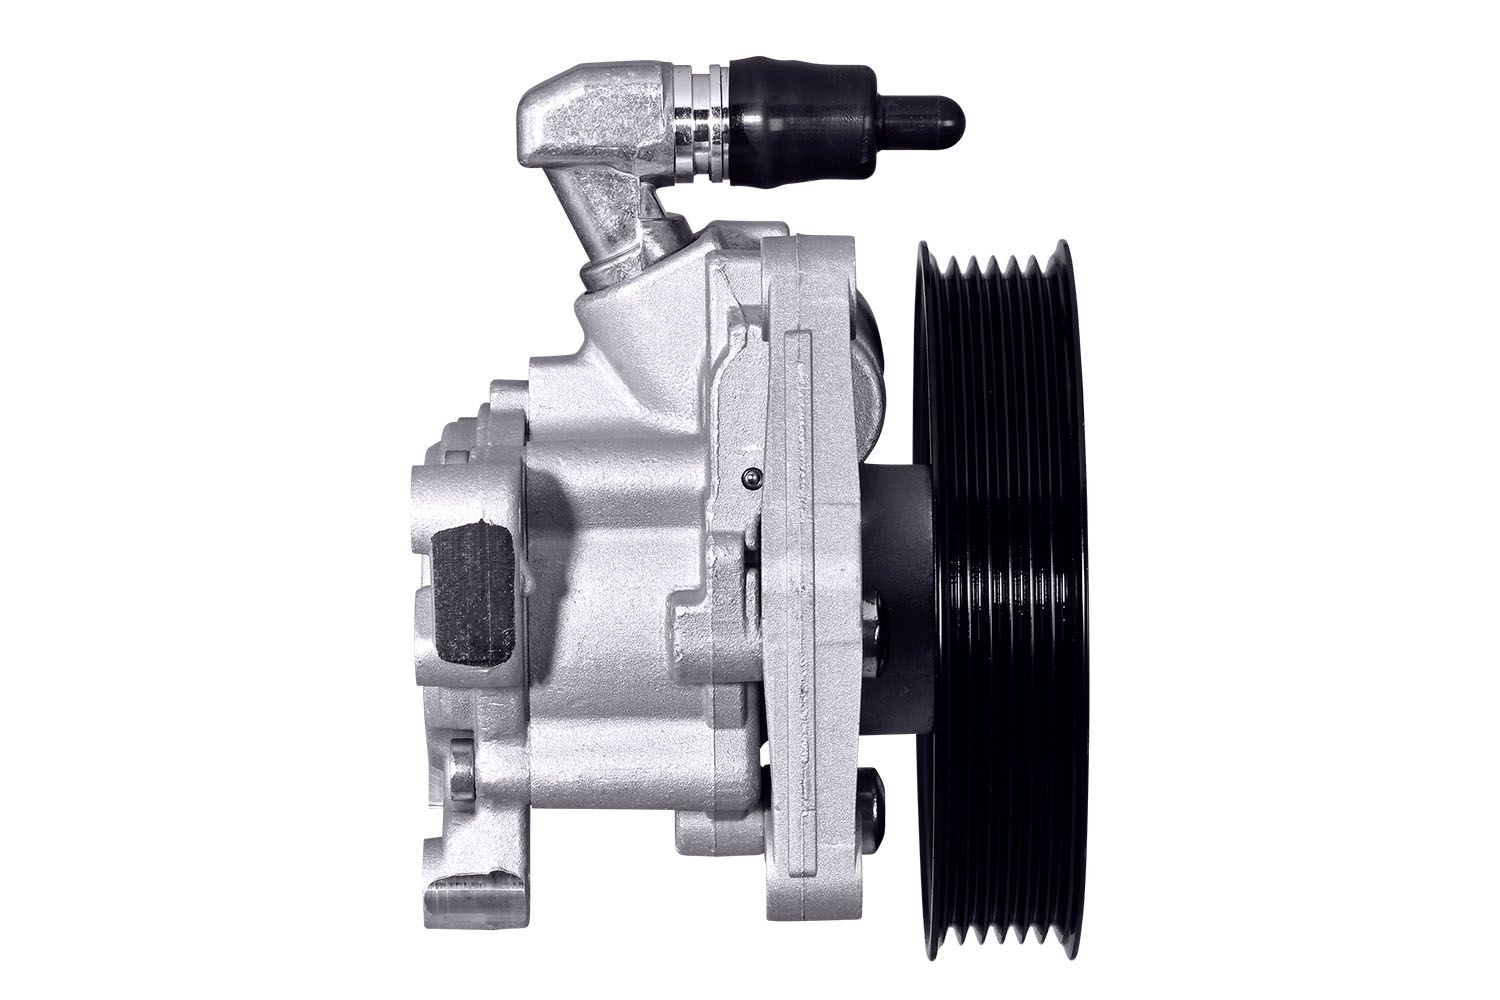 HELLA Hydraulic steering pump 8TL 359 003-391 suitable for MERCEDES-BENZ ML-Class, R-Class, GL